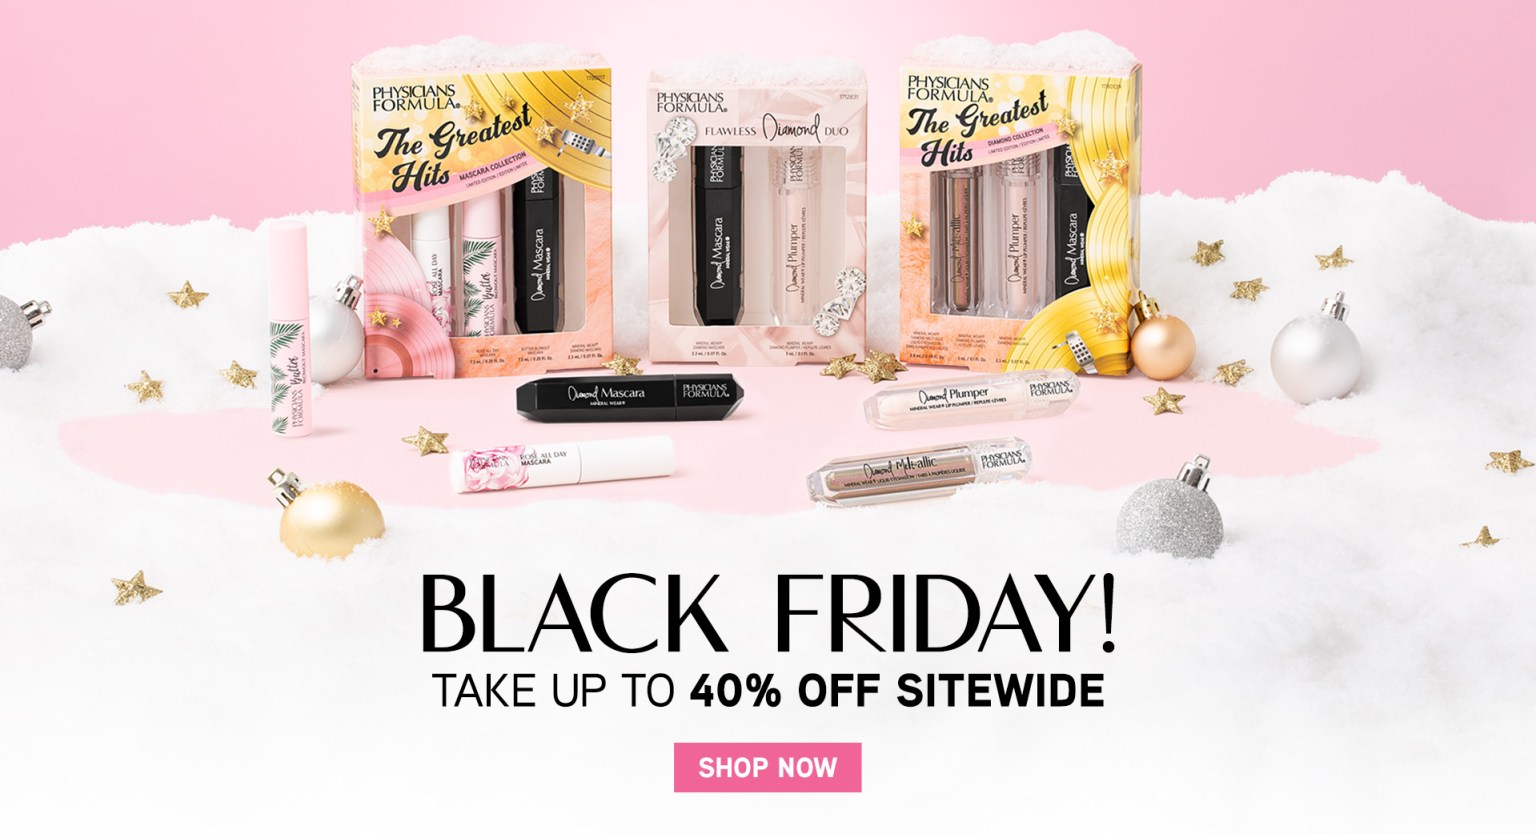 Physicians Formula - Get 40% Off EVERYTHING